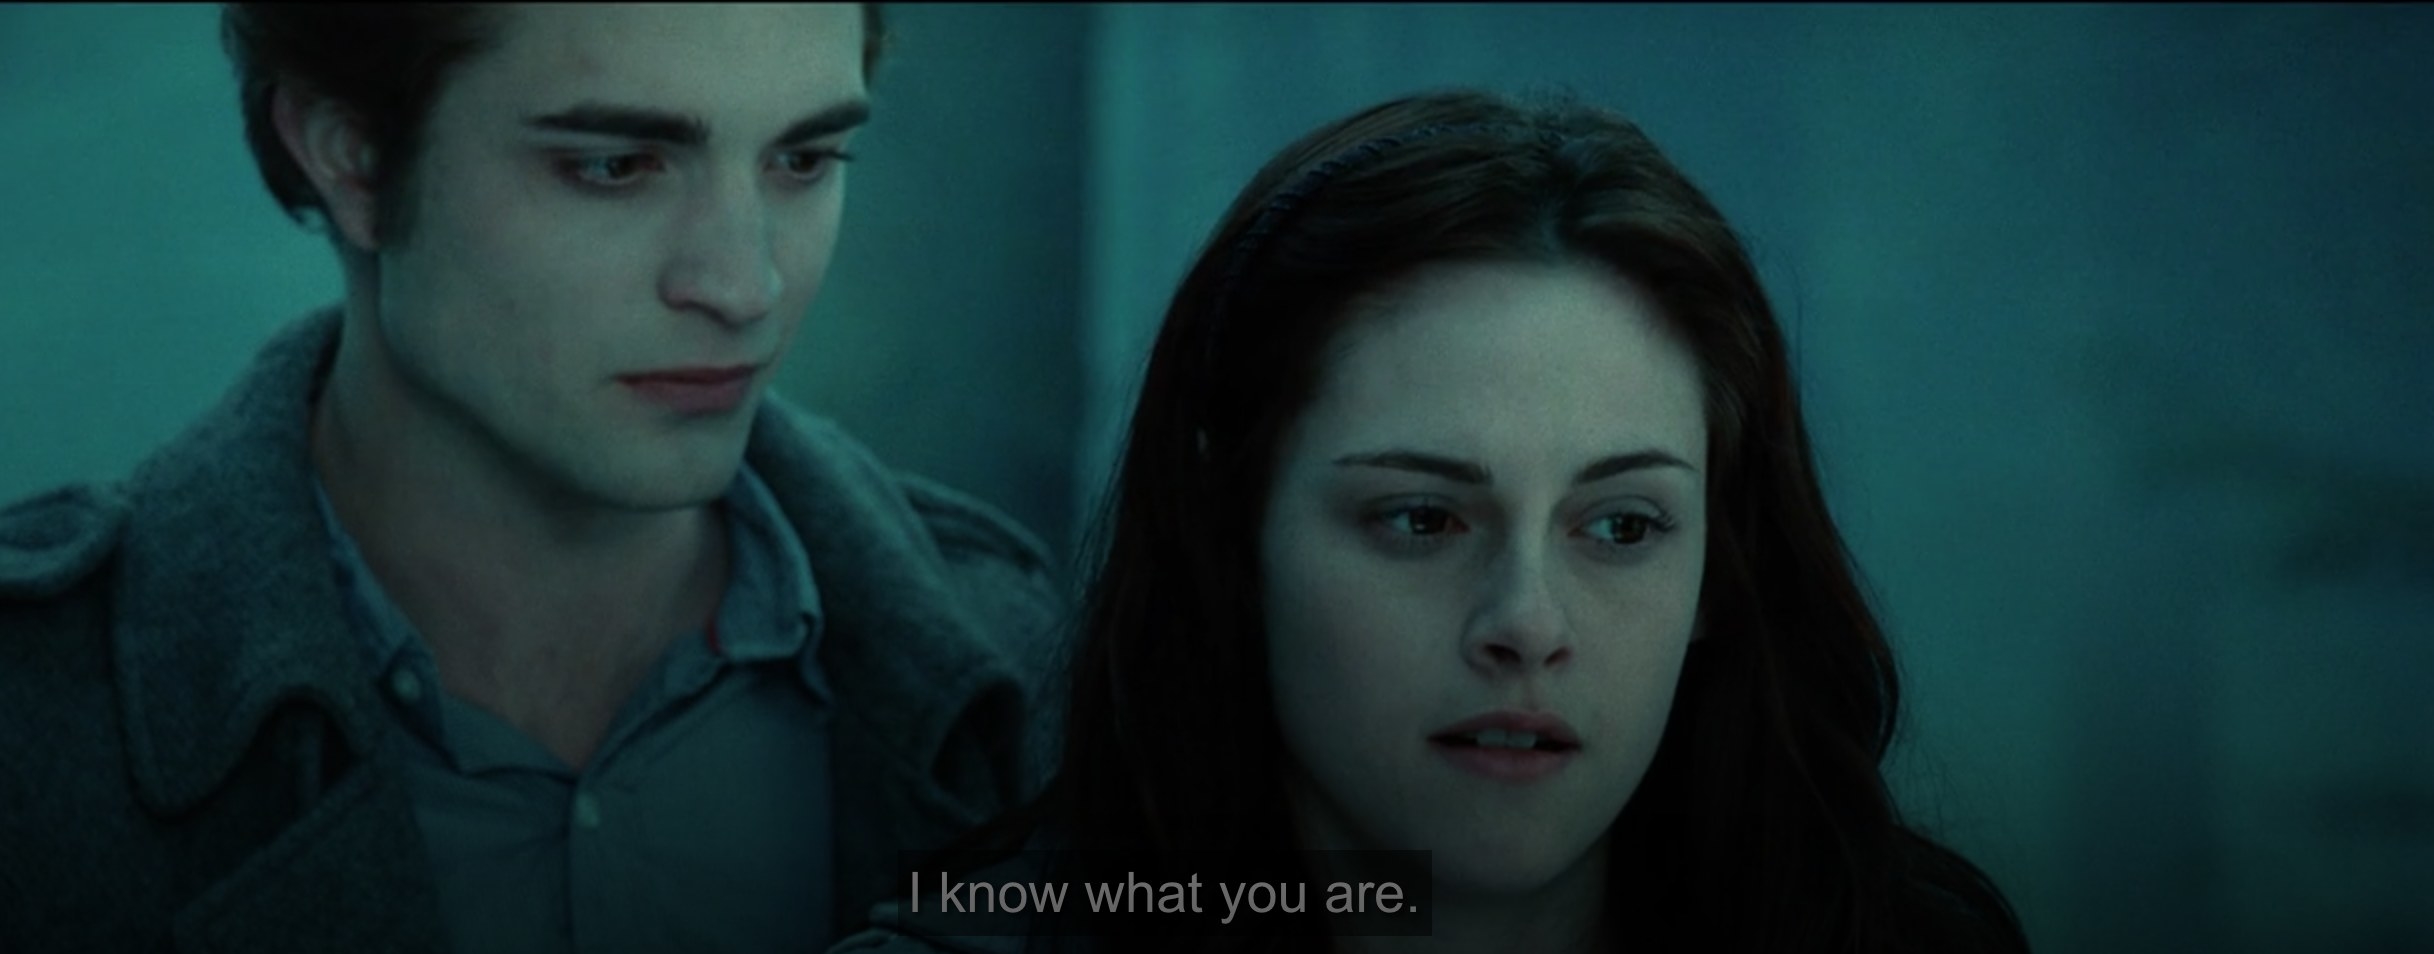 Kristen Stewart confronts Robert Pattinson saying &quot;I know what you are.&quot;